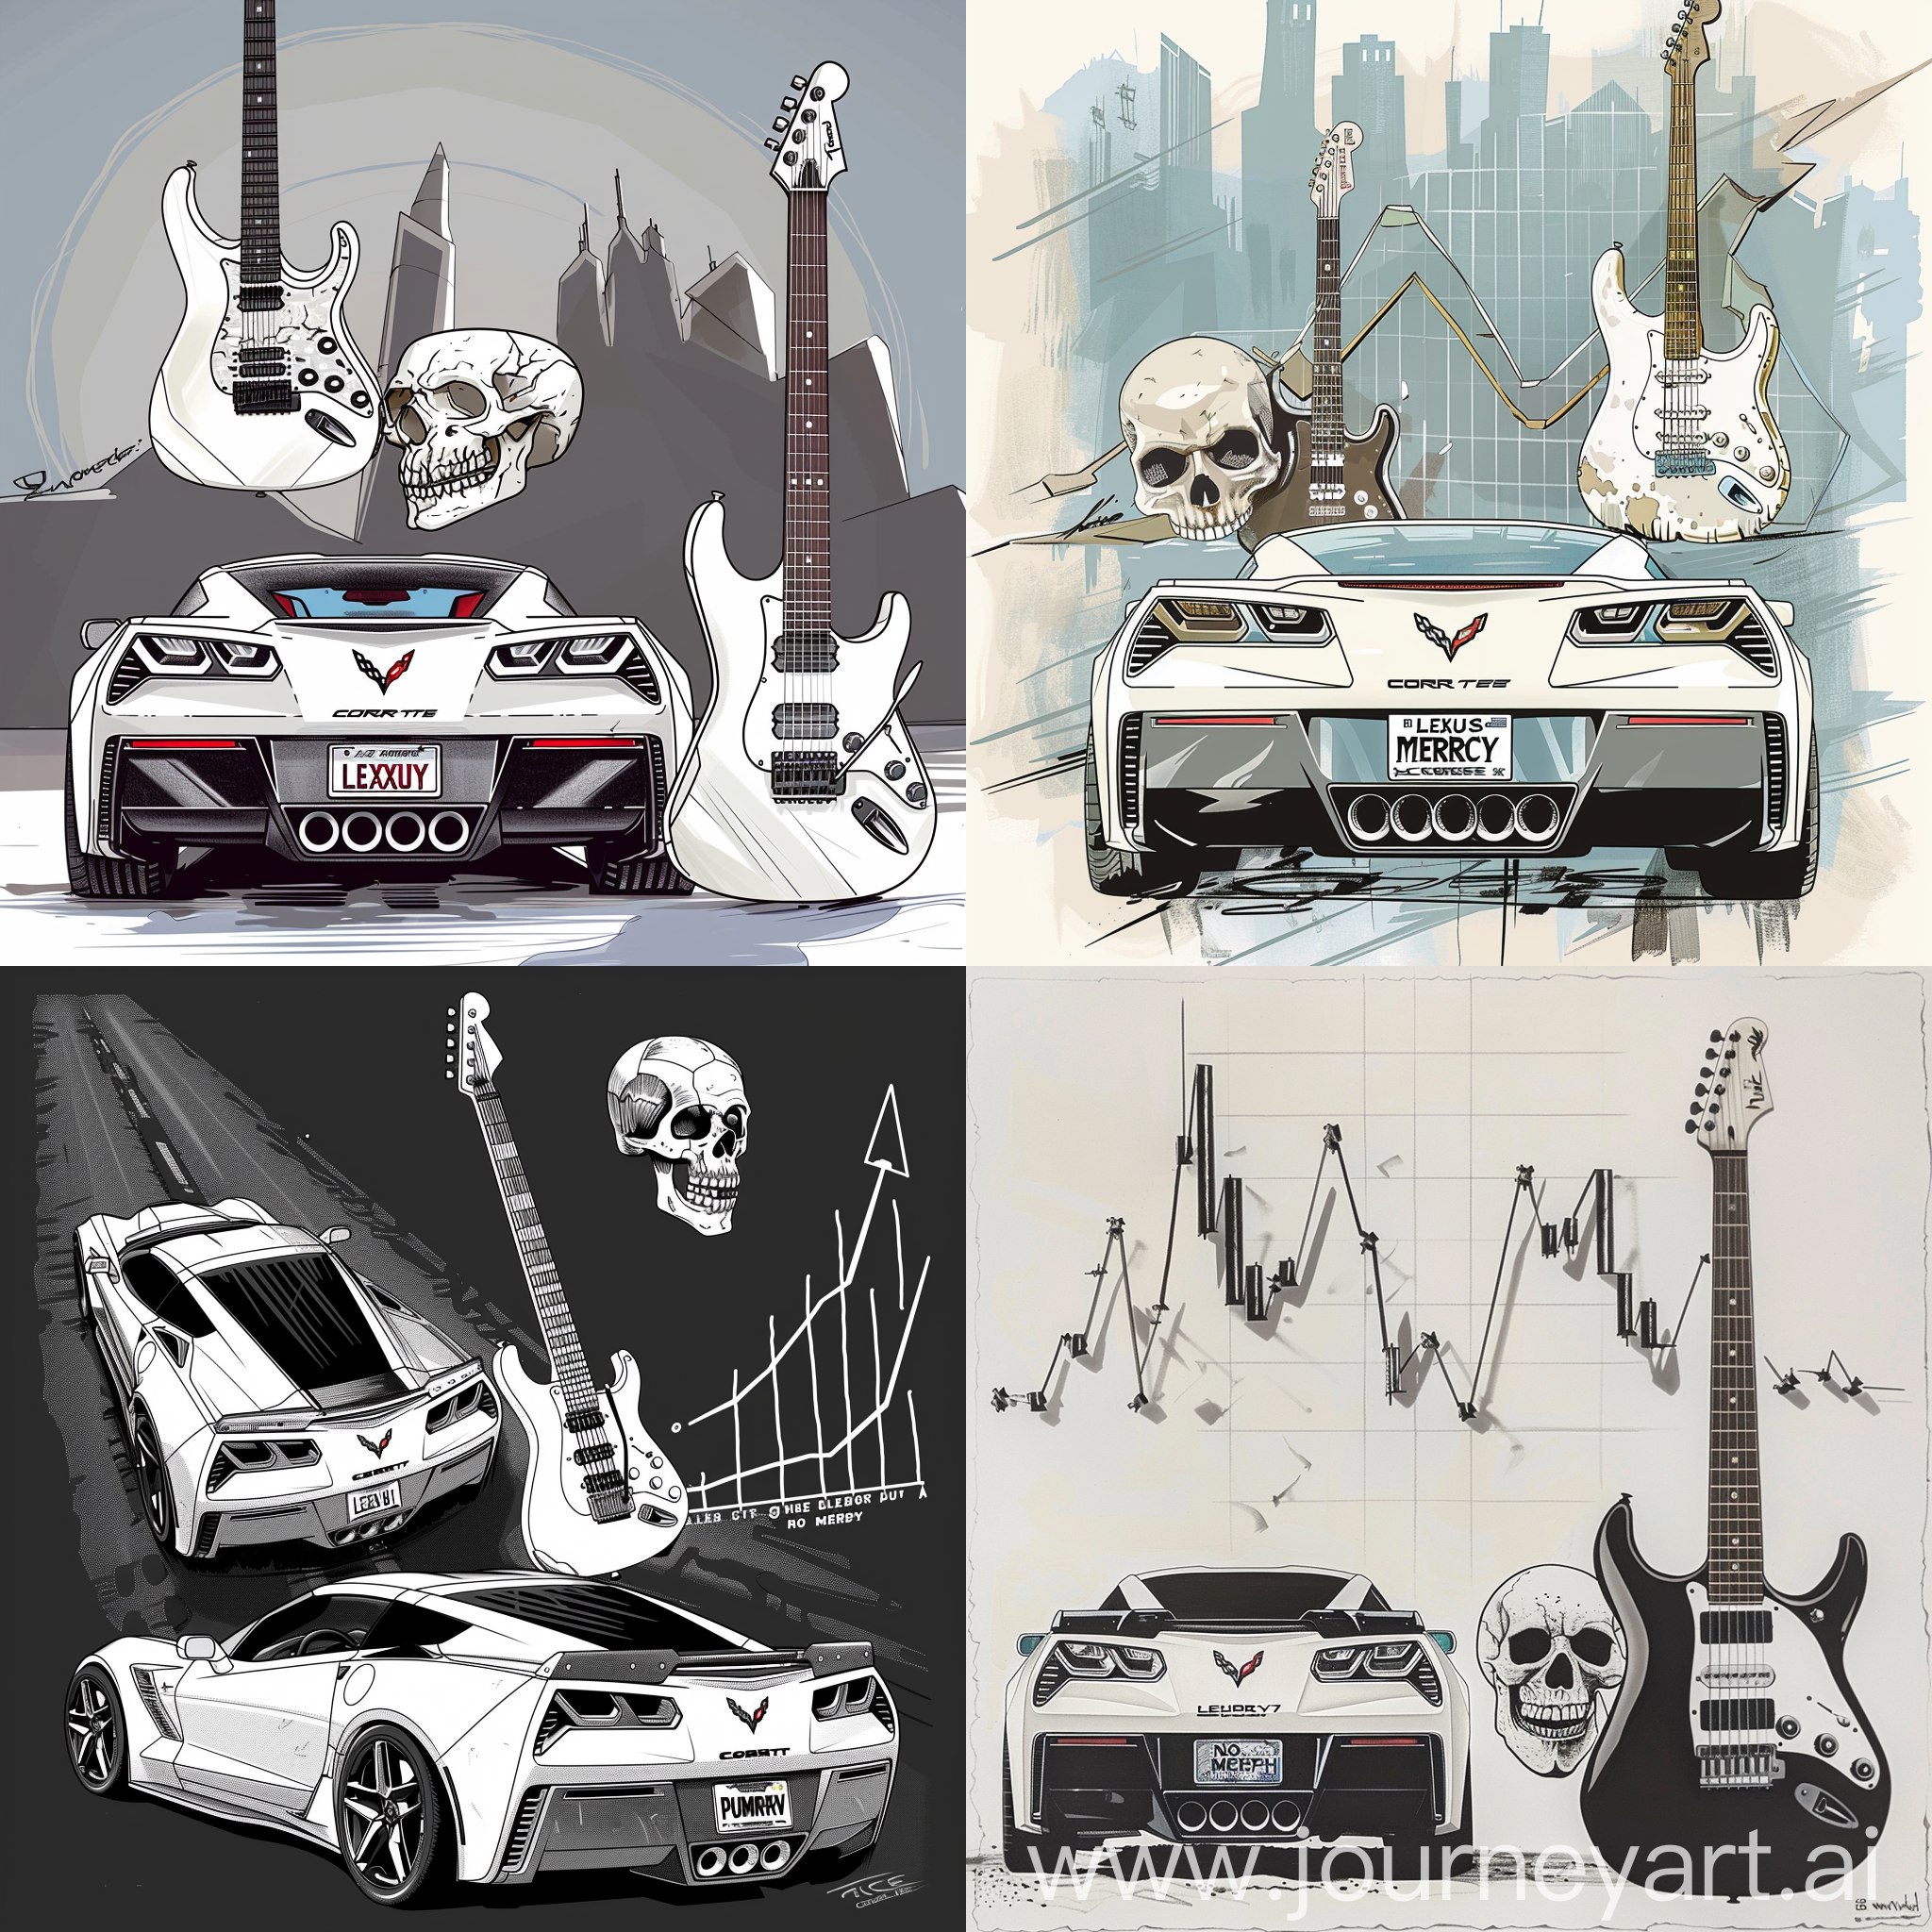 draw a car corvette c7 in white color, view of the car from behind, license plates on the car the inscription "LEXUS MERCY" next to the car draw an electric guitar in the shape of "explorer". next to the guitar a white skull "no mercy" from the series "punisher". in the background draw a graph of bitcoin that goes upwards